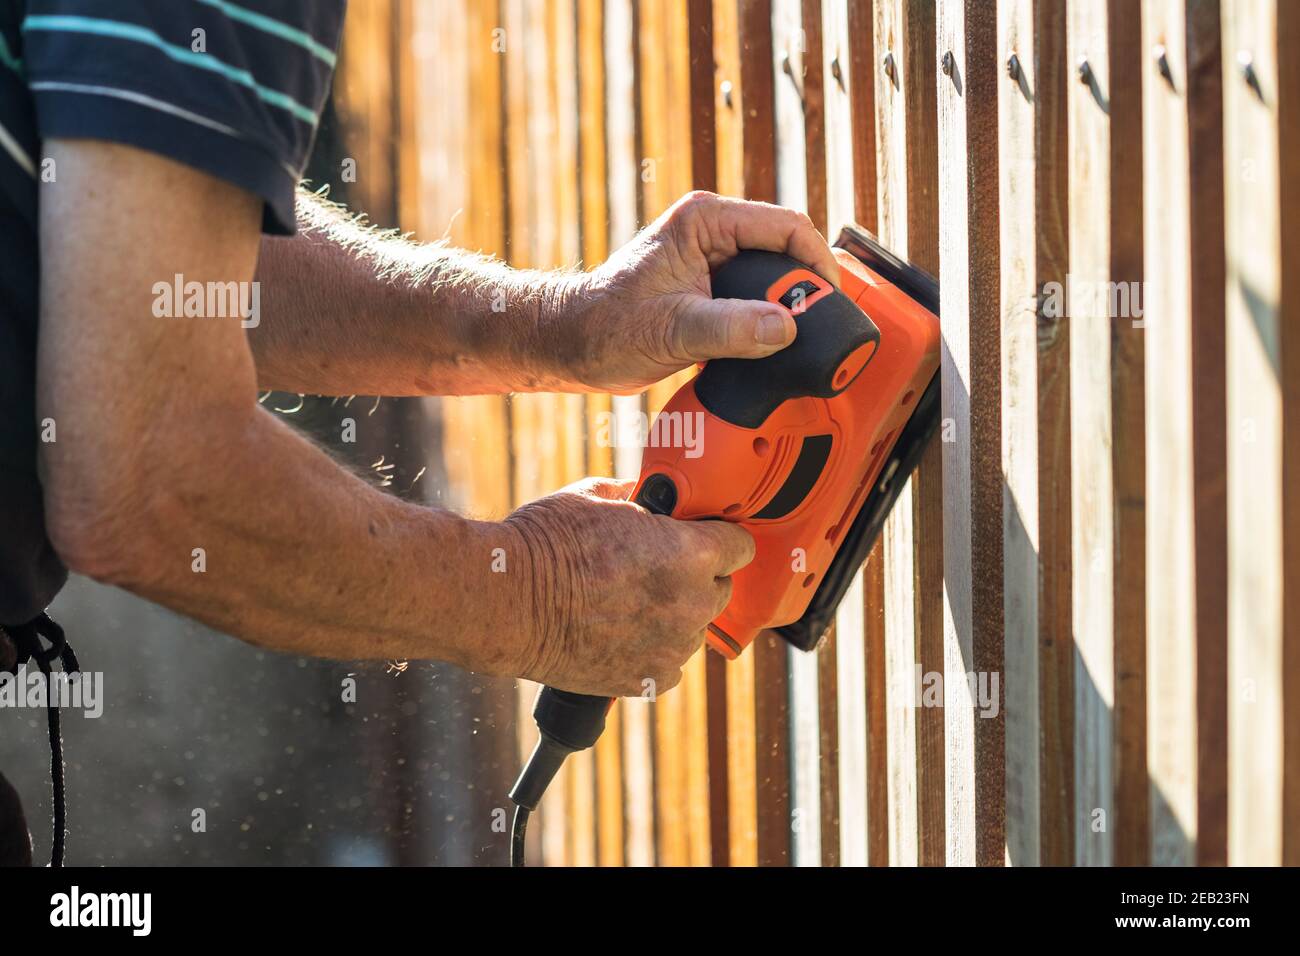 Sanding wood. Close-up vibrating sander in hands. Grinding and repairing wooden fence Stock Photo